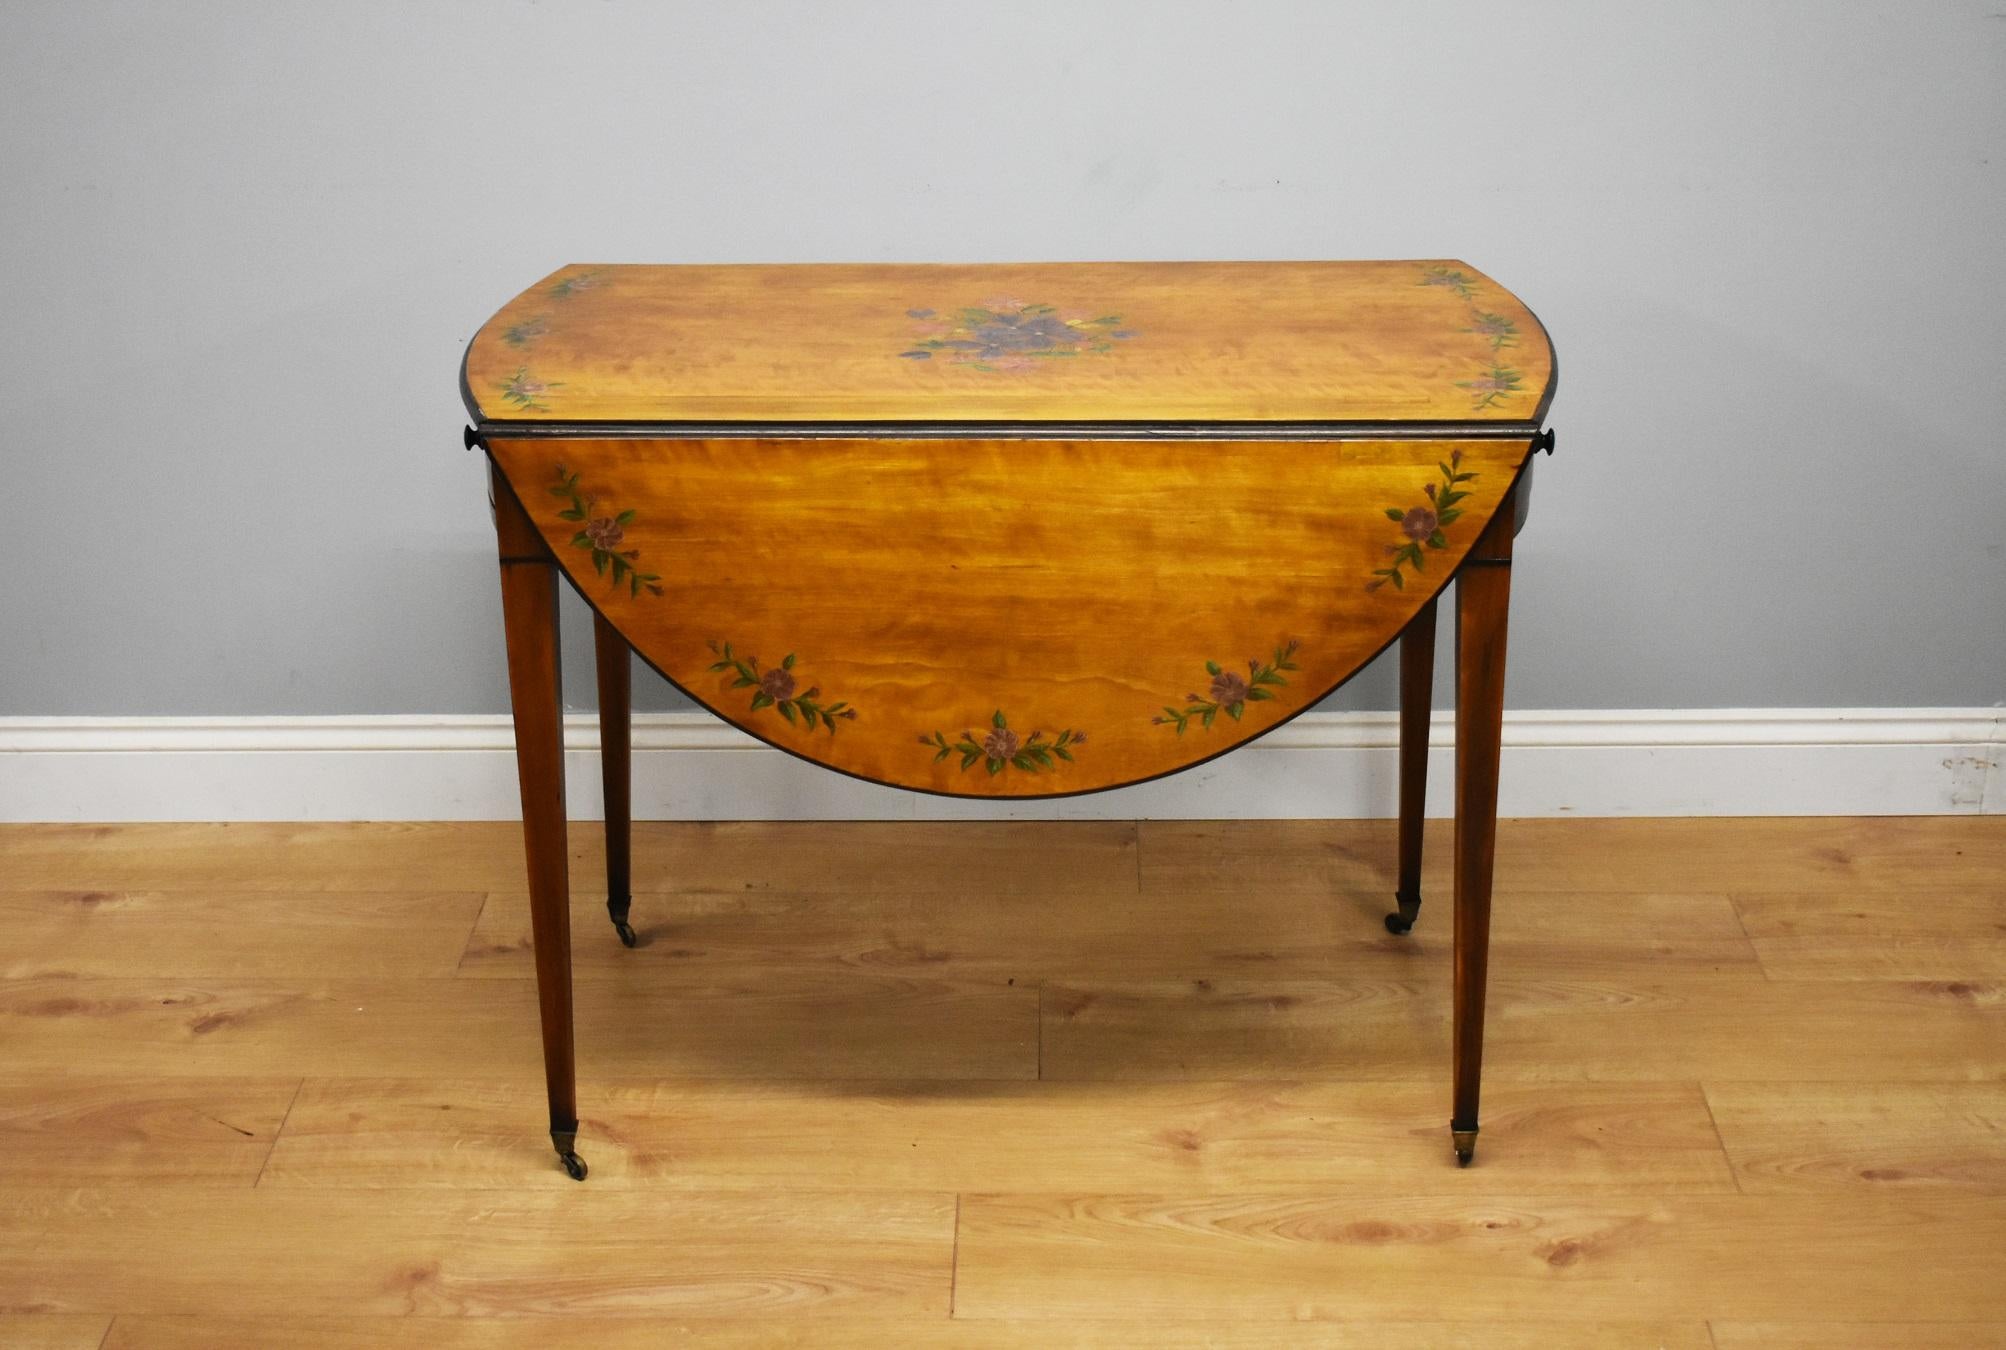 For sale is a fine Edwardian hand painted satinwood pembroke table. The top of the table is decorated with floral swags, with further floral work to the centre. There is a lift up flap on either side, which when open further compliments the top with